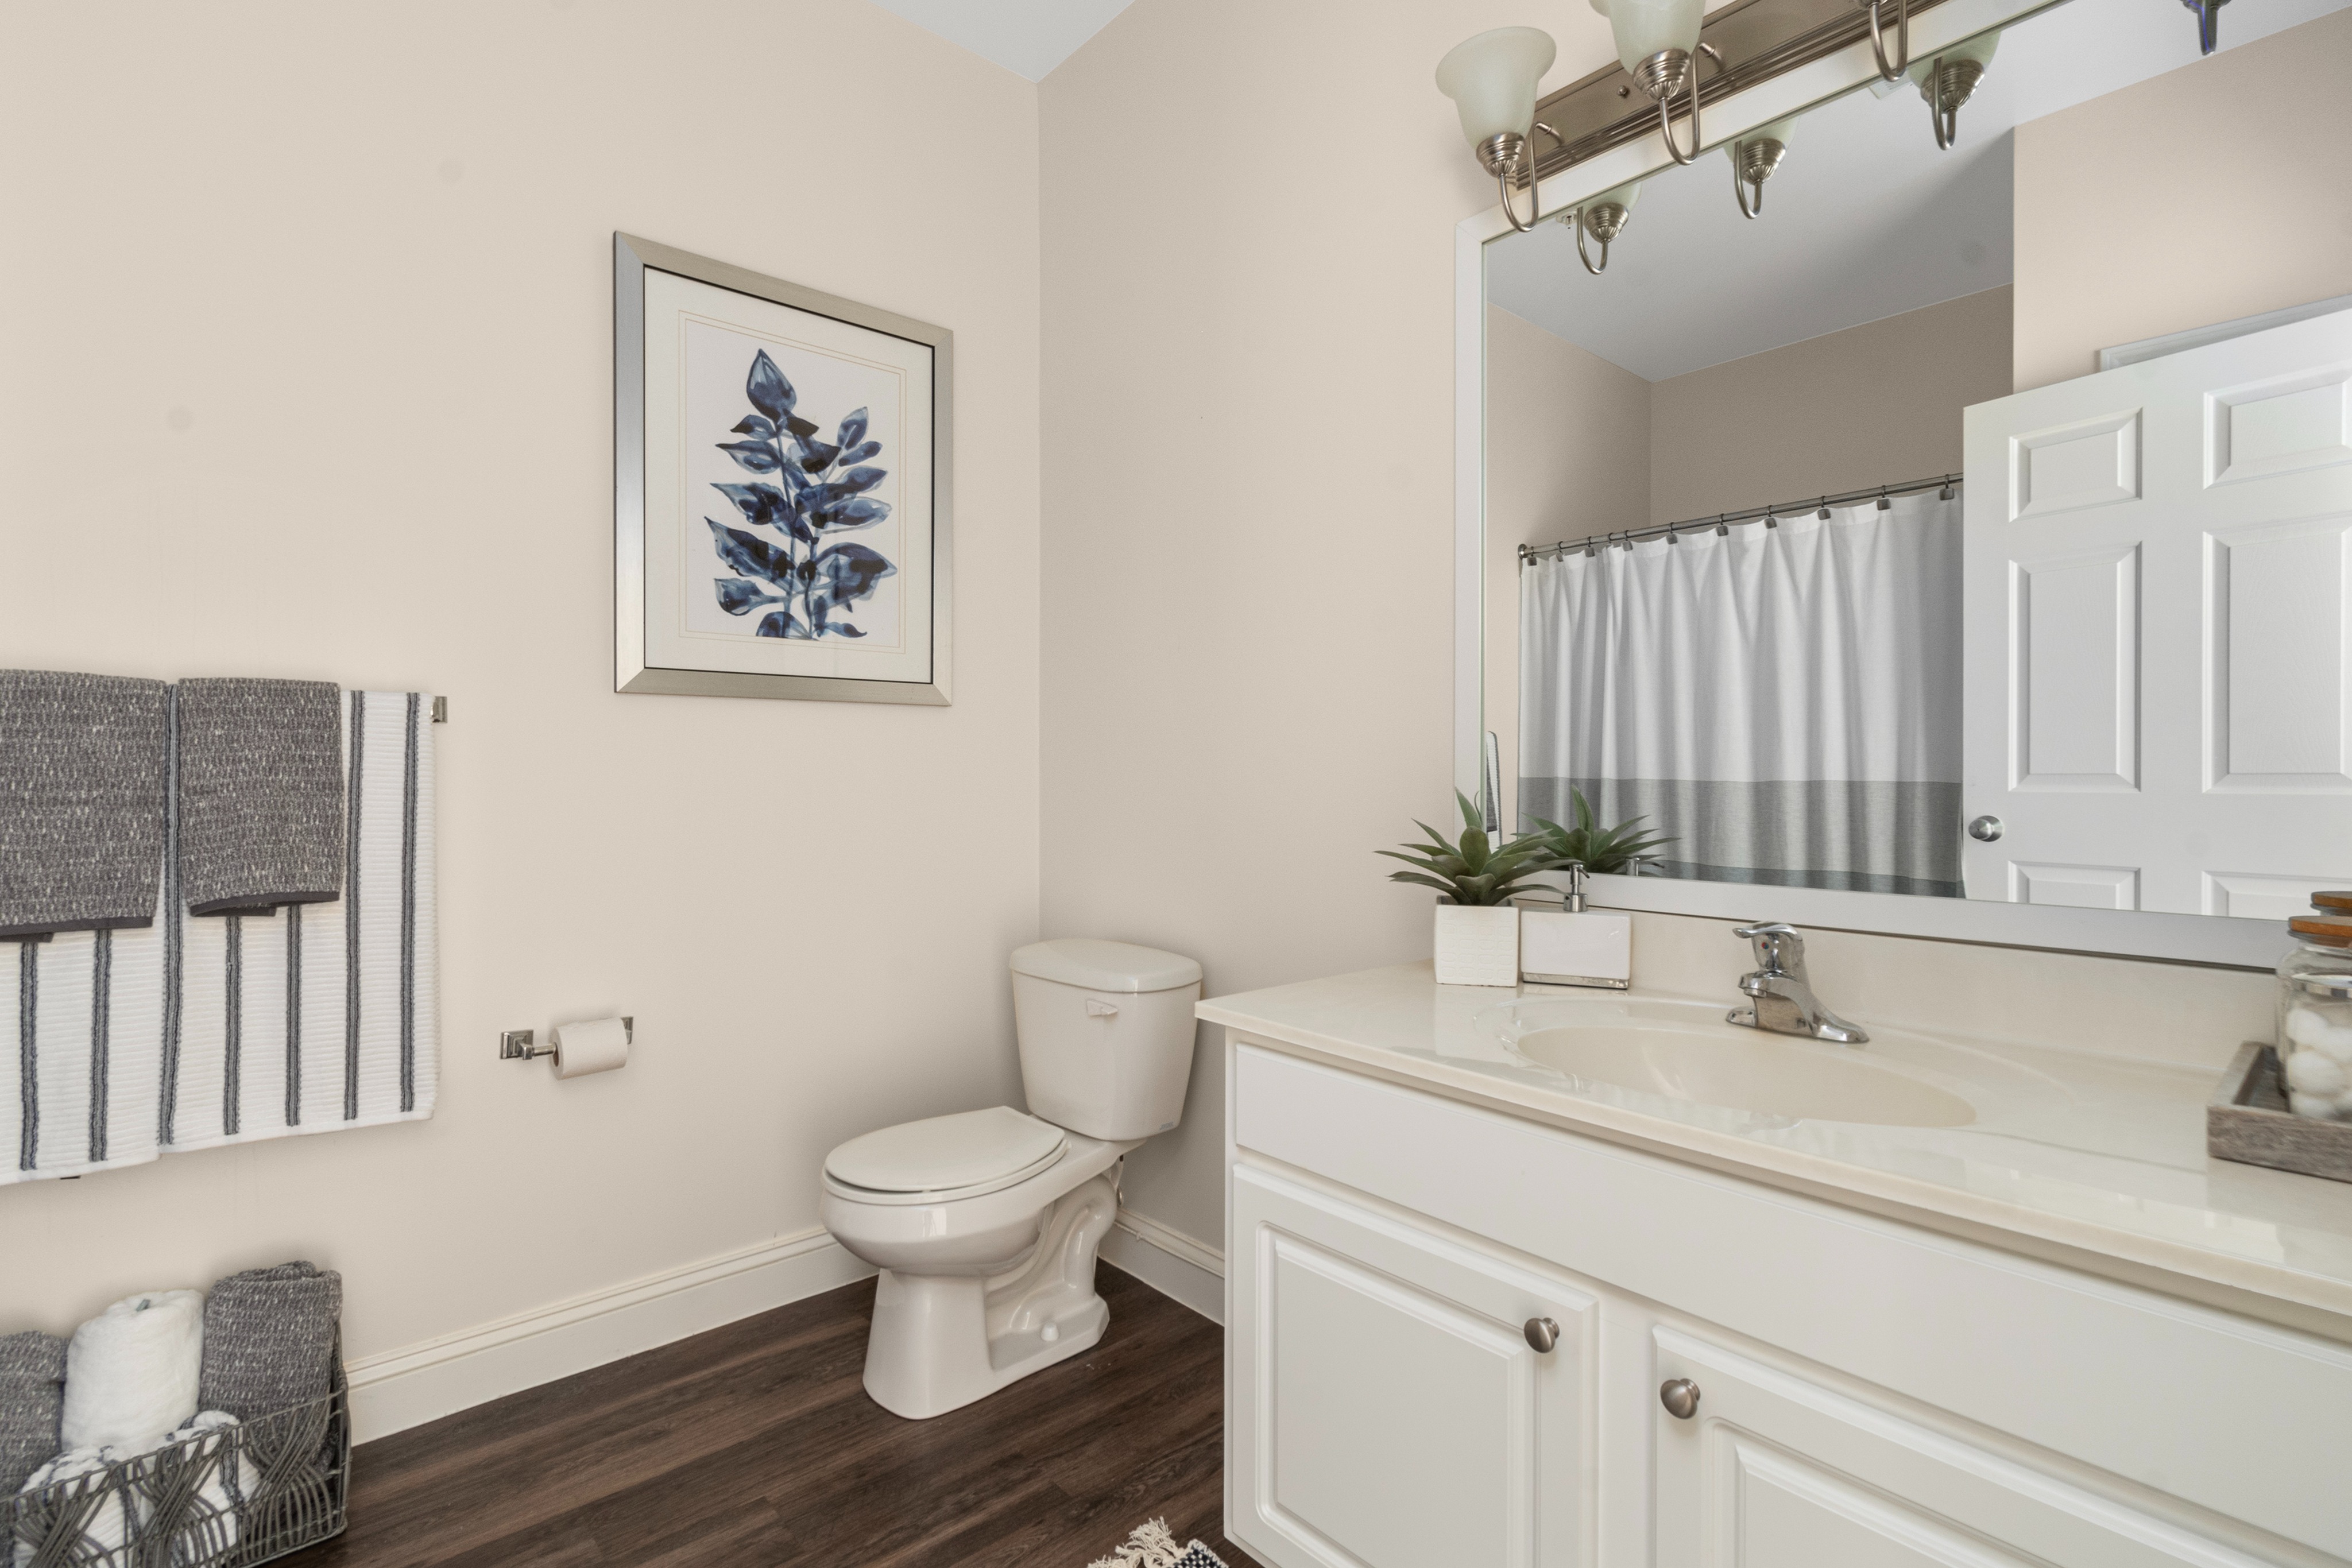 Spacious Master Bathroom | Apartments Homes for rent in Cranston, RI | Independence Place